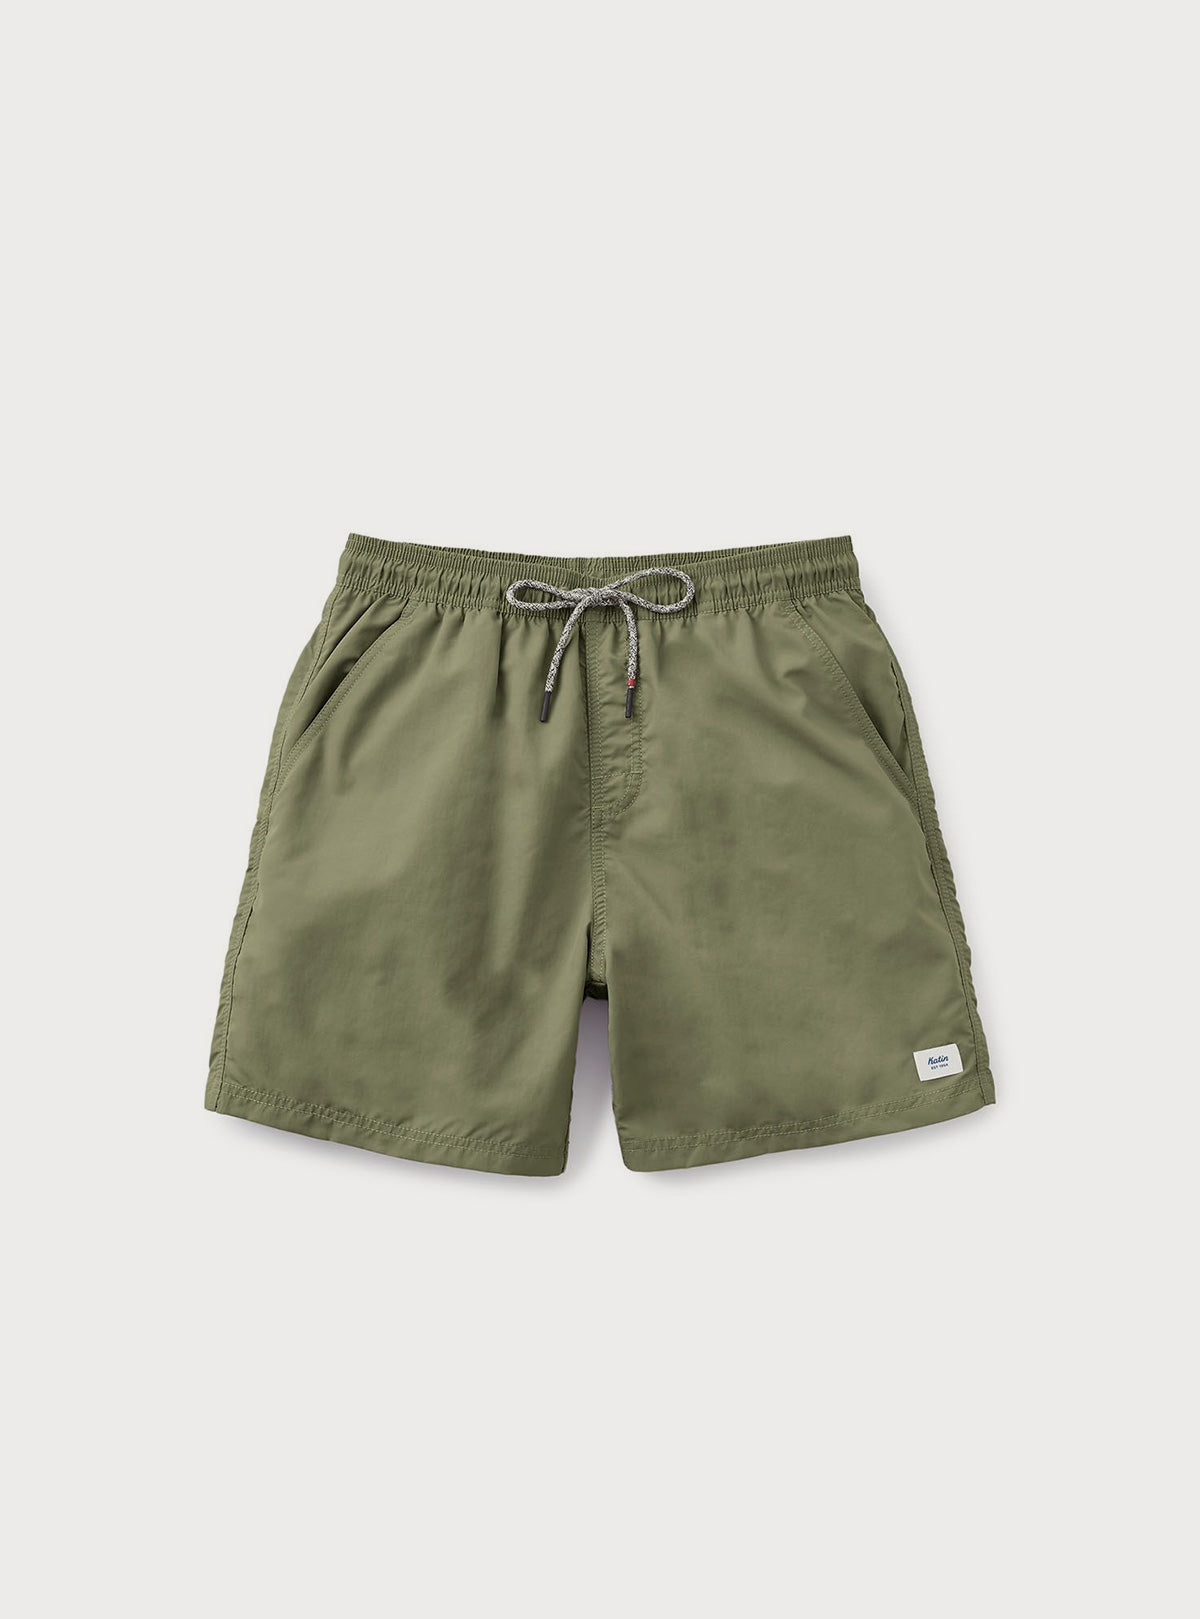 Katin - Poolside Volley - Olive